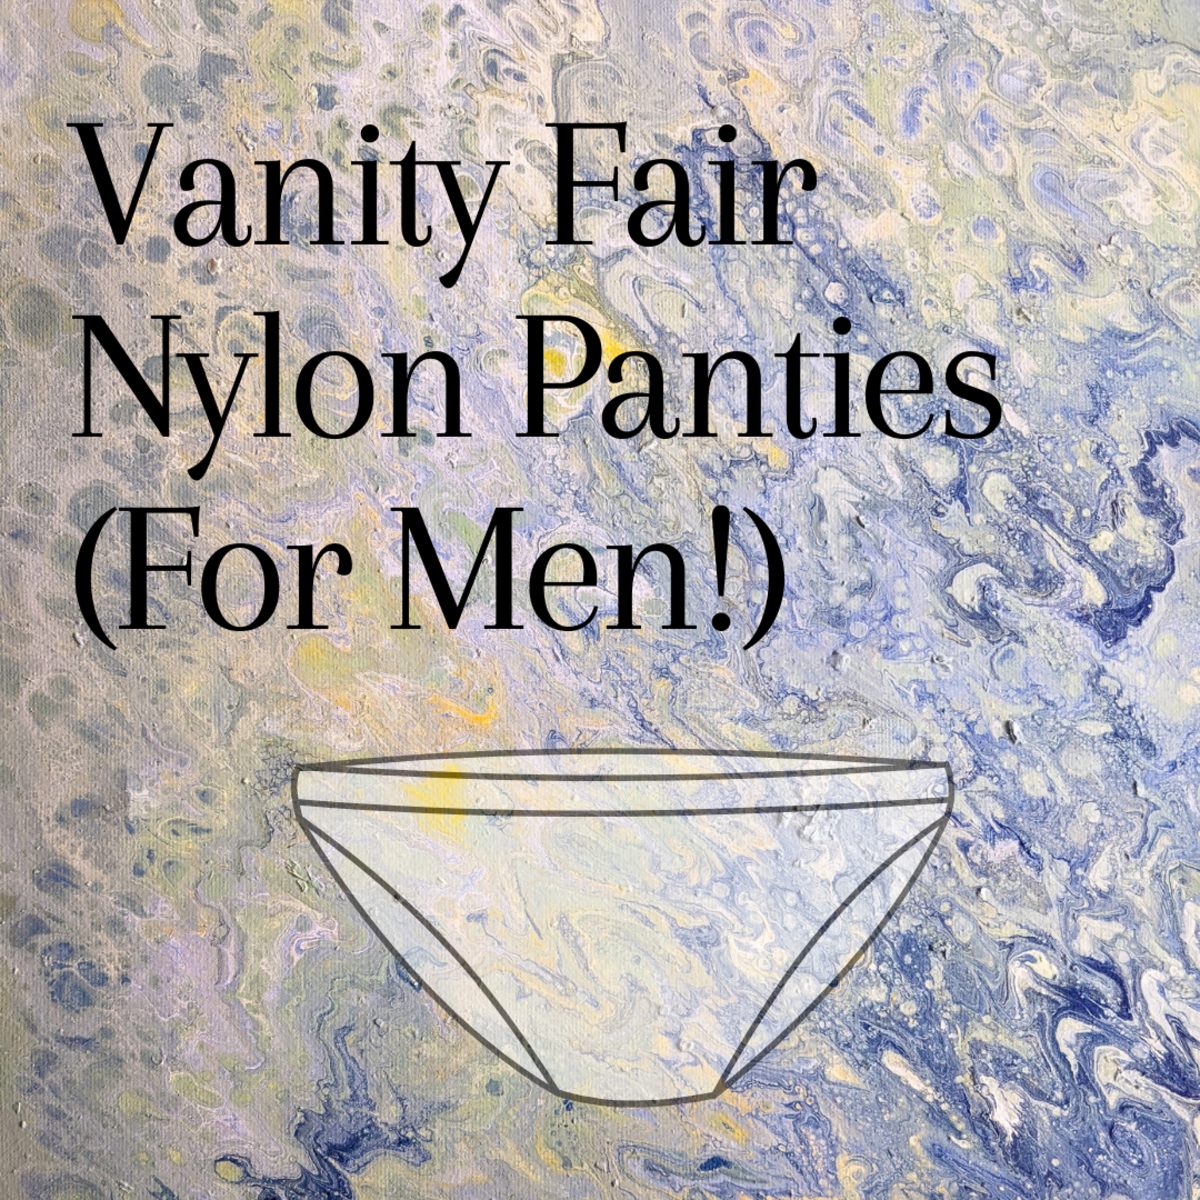 What panties from Vanity Fair are most comfortable?